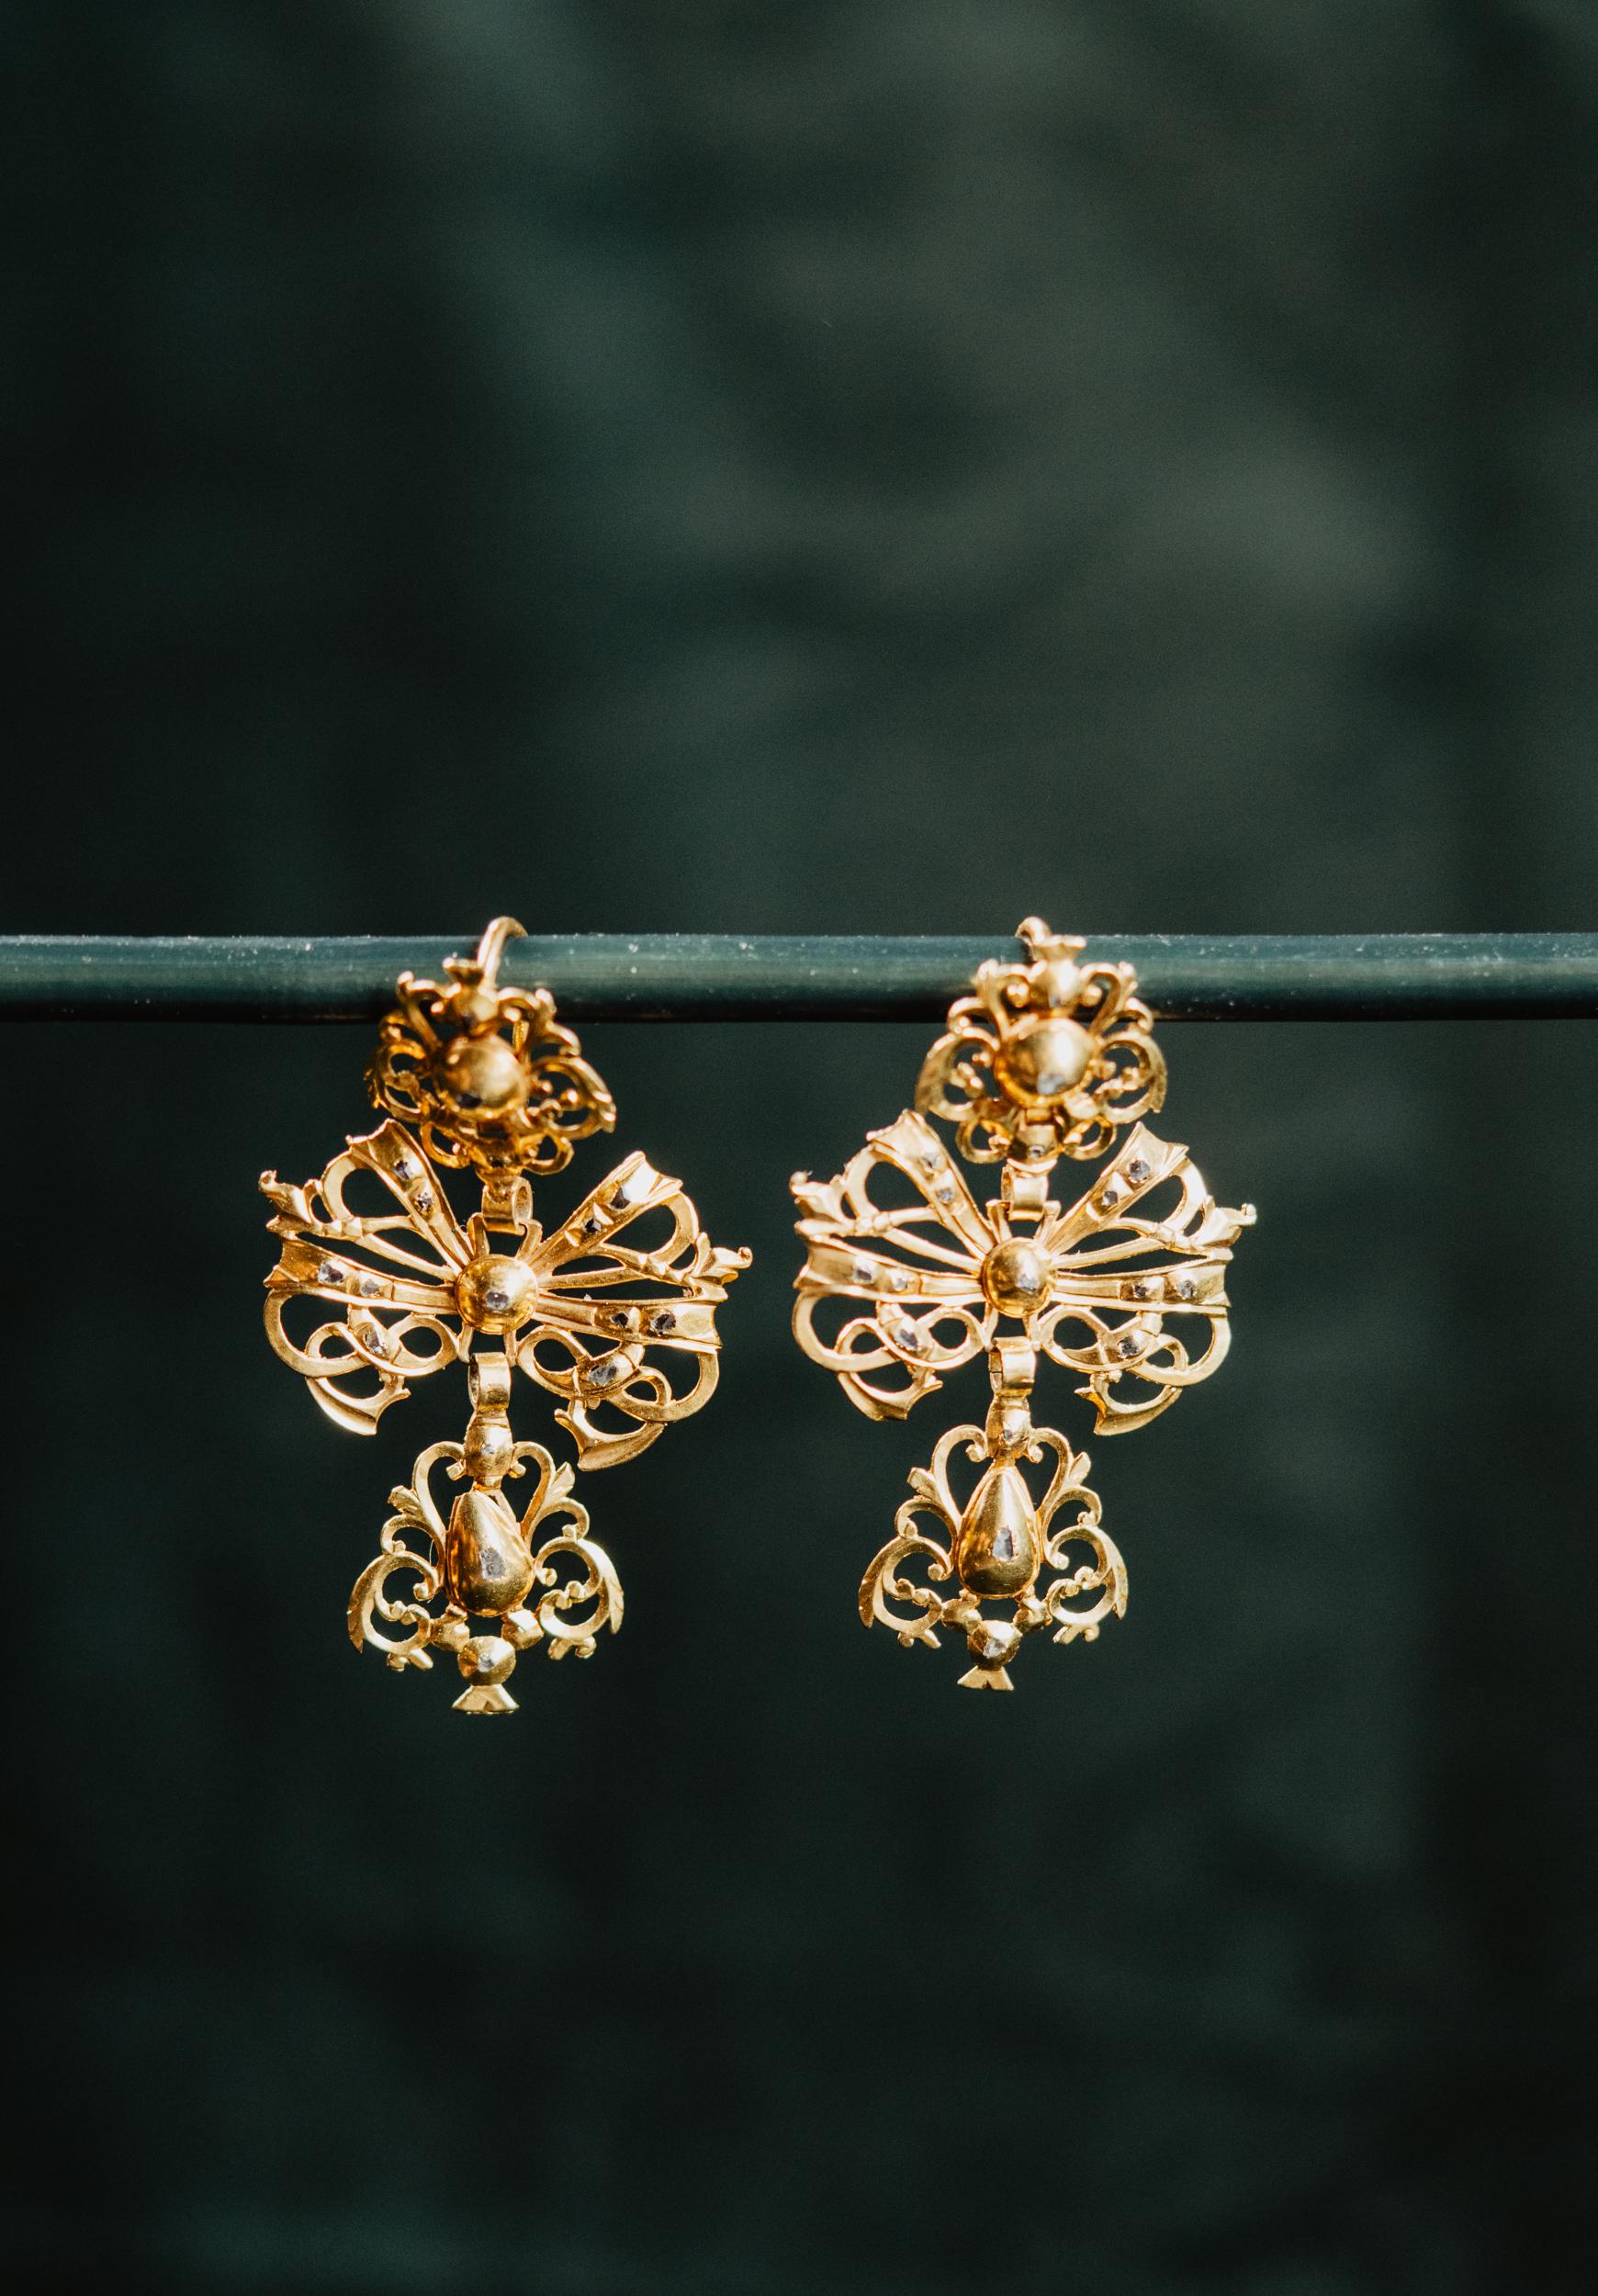 A museum-worthy 300 year old pair of solid 15k gold Iberian earrings! Coming from Madrid in Spain, these antique Georgian era high carat gold earrings are set with natural simplified cut diamonds.

The earrings are a perfect example of 18th century